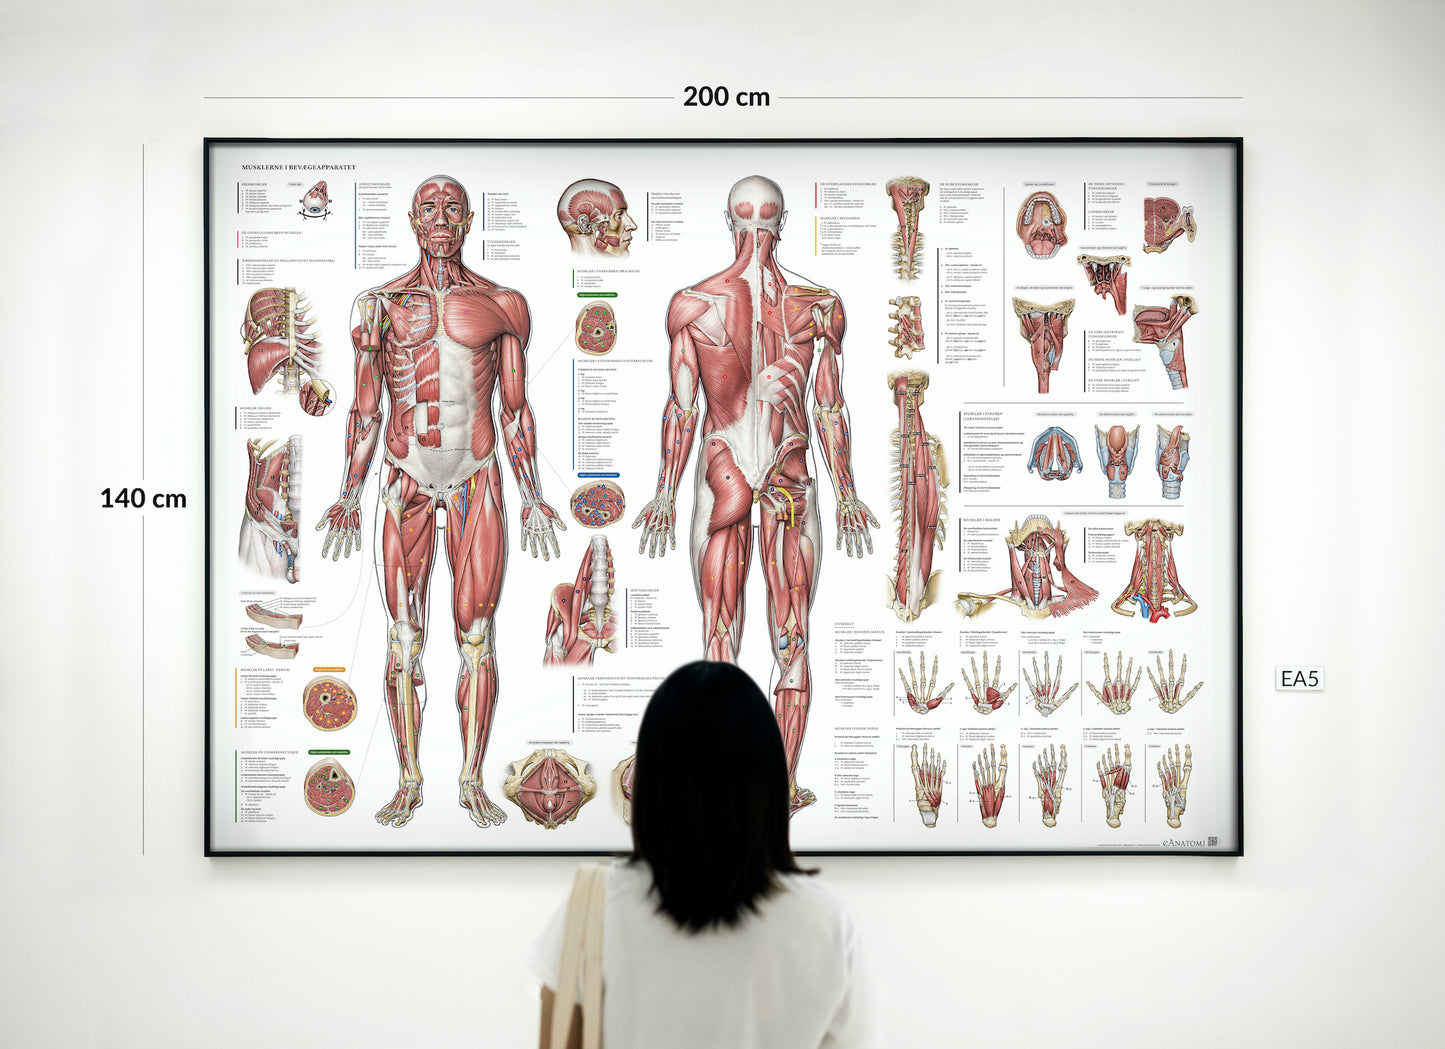 Anatomy poster - The muscular system EA5